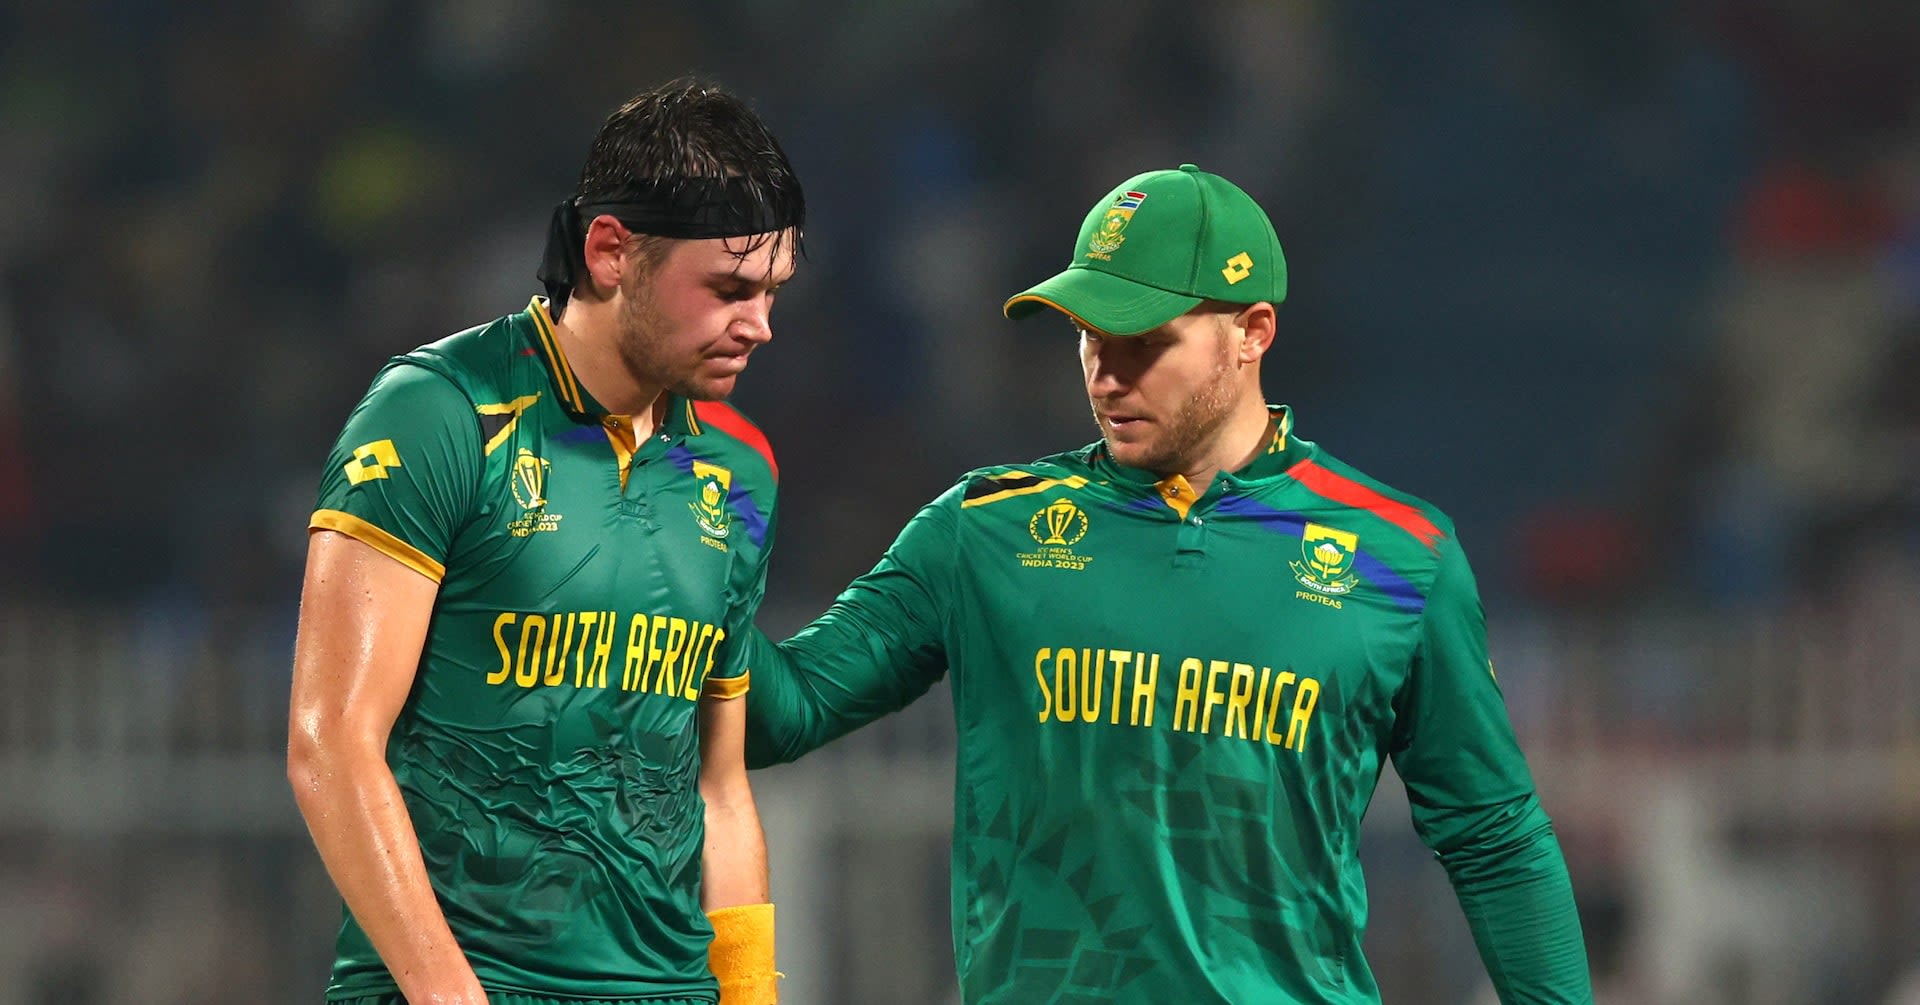 South Africa lose fast bowler Coetzee for test series in West Indies